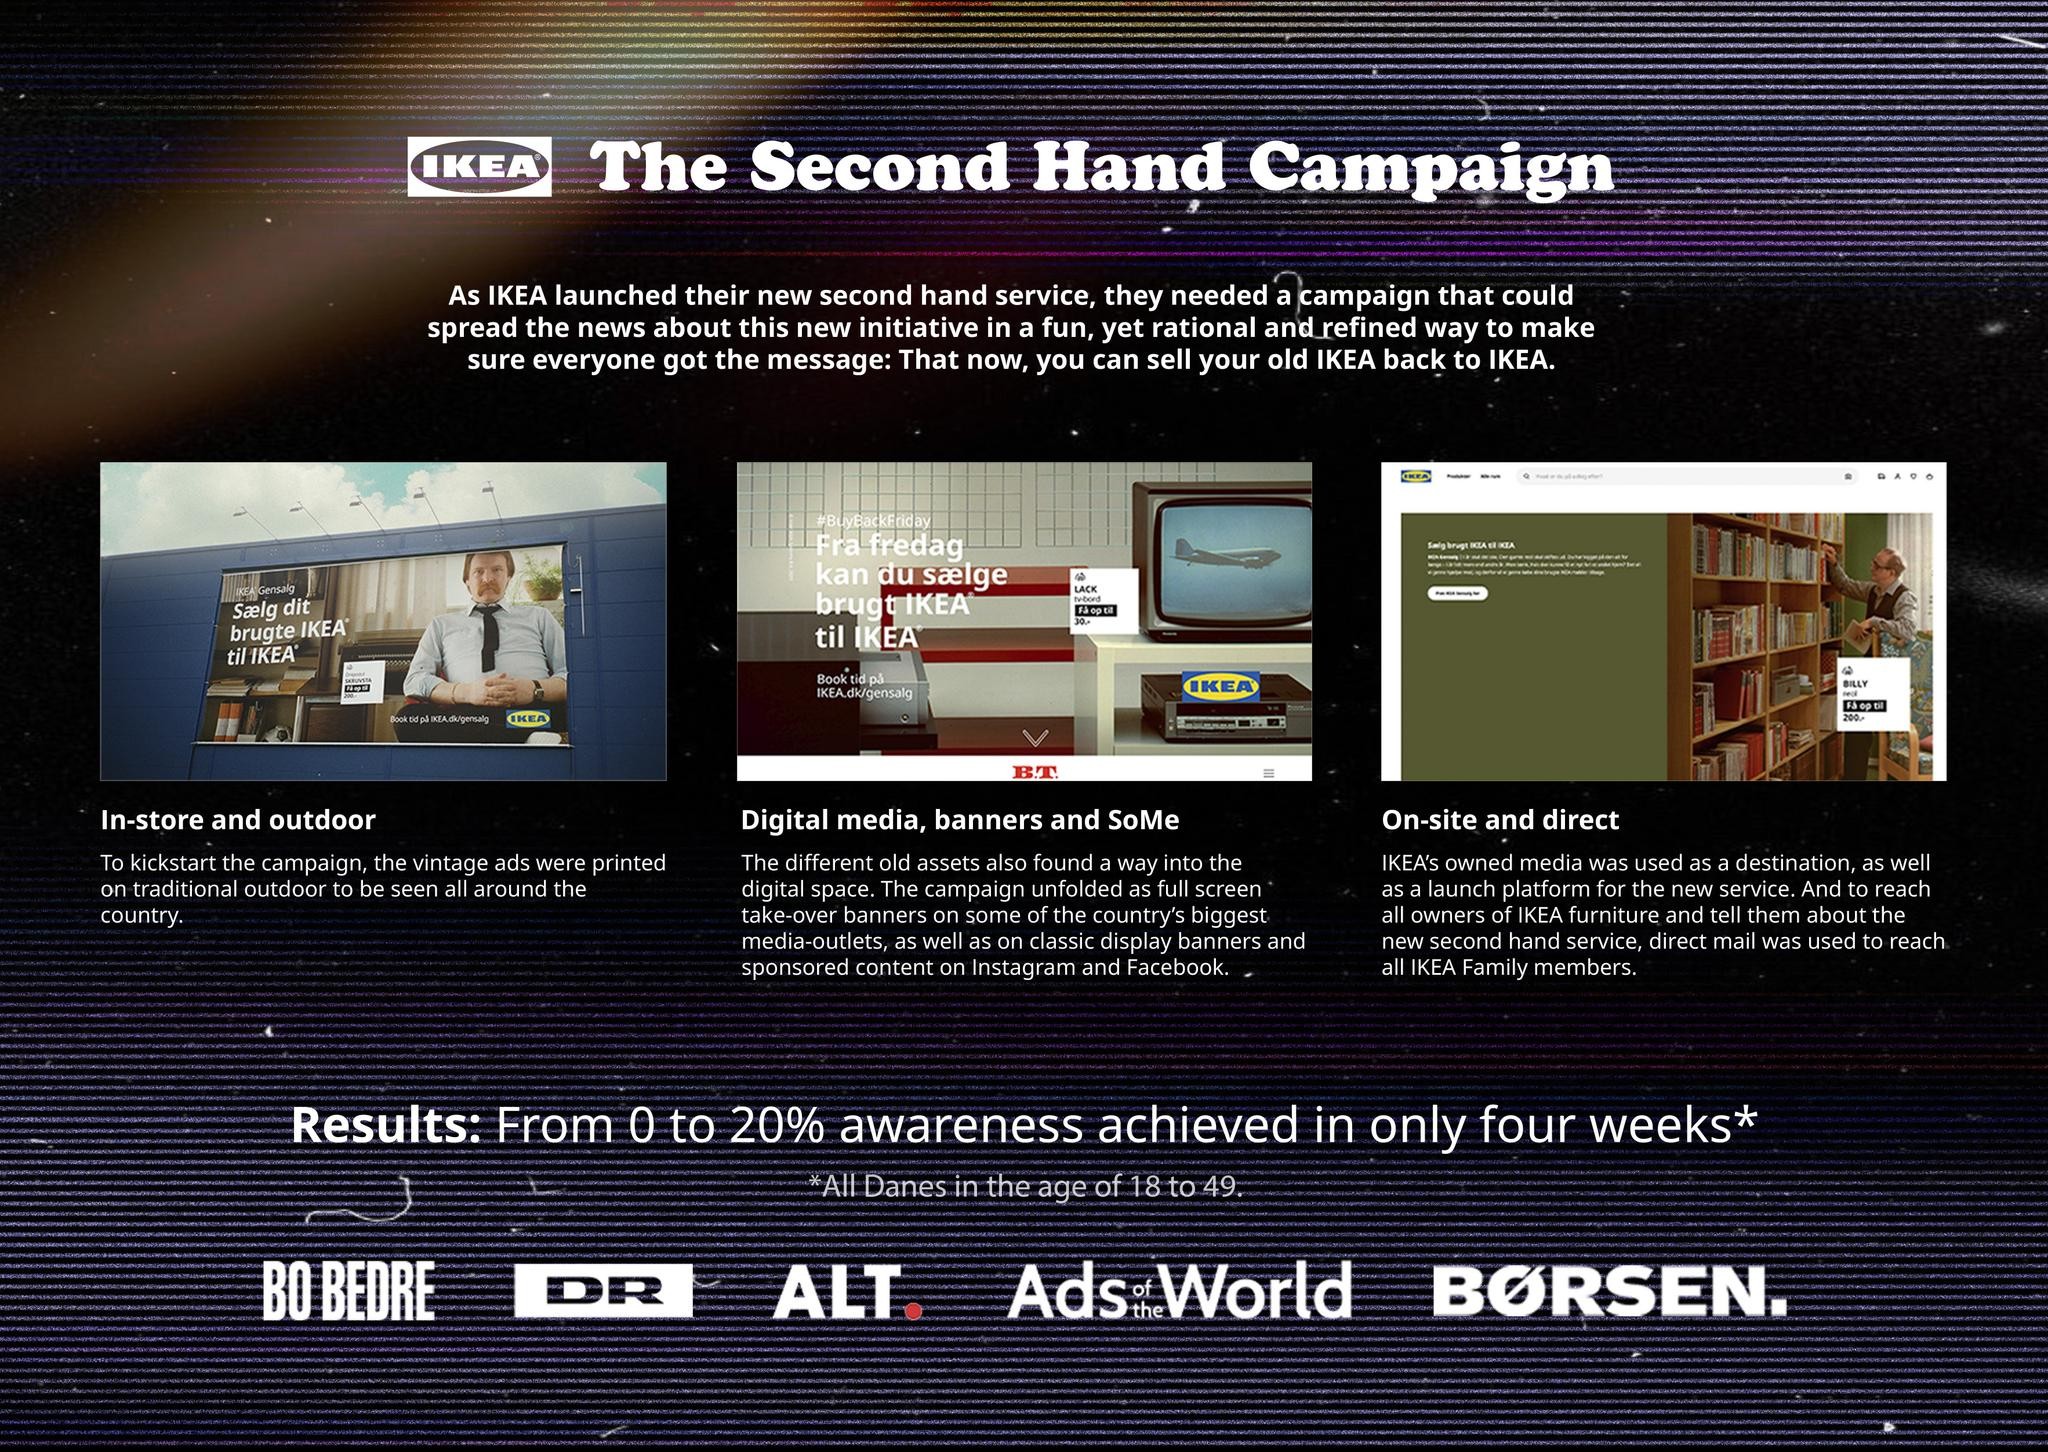 The Second Hand Campaign